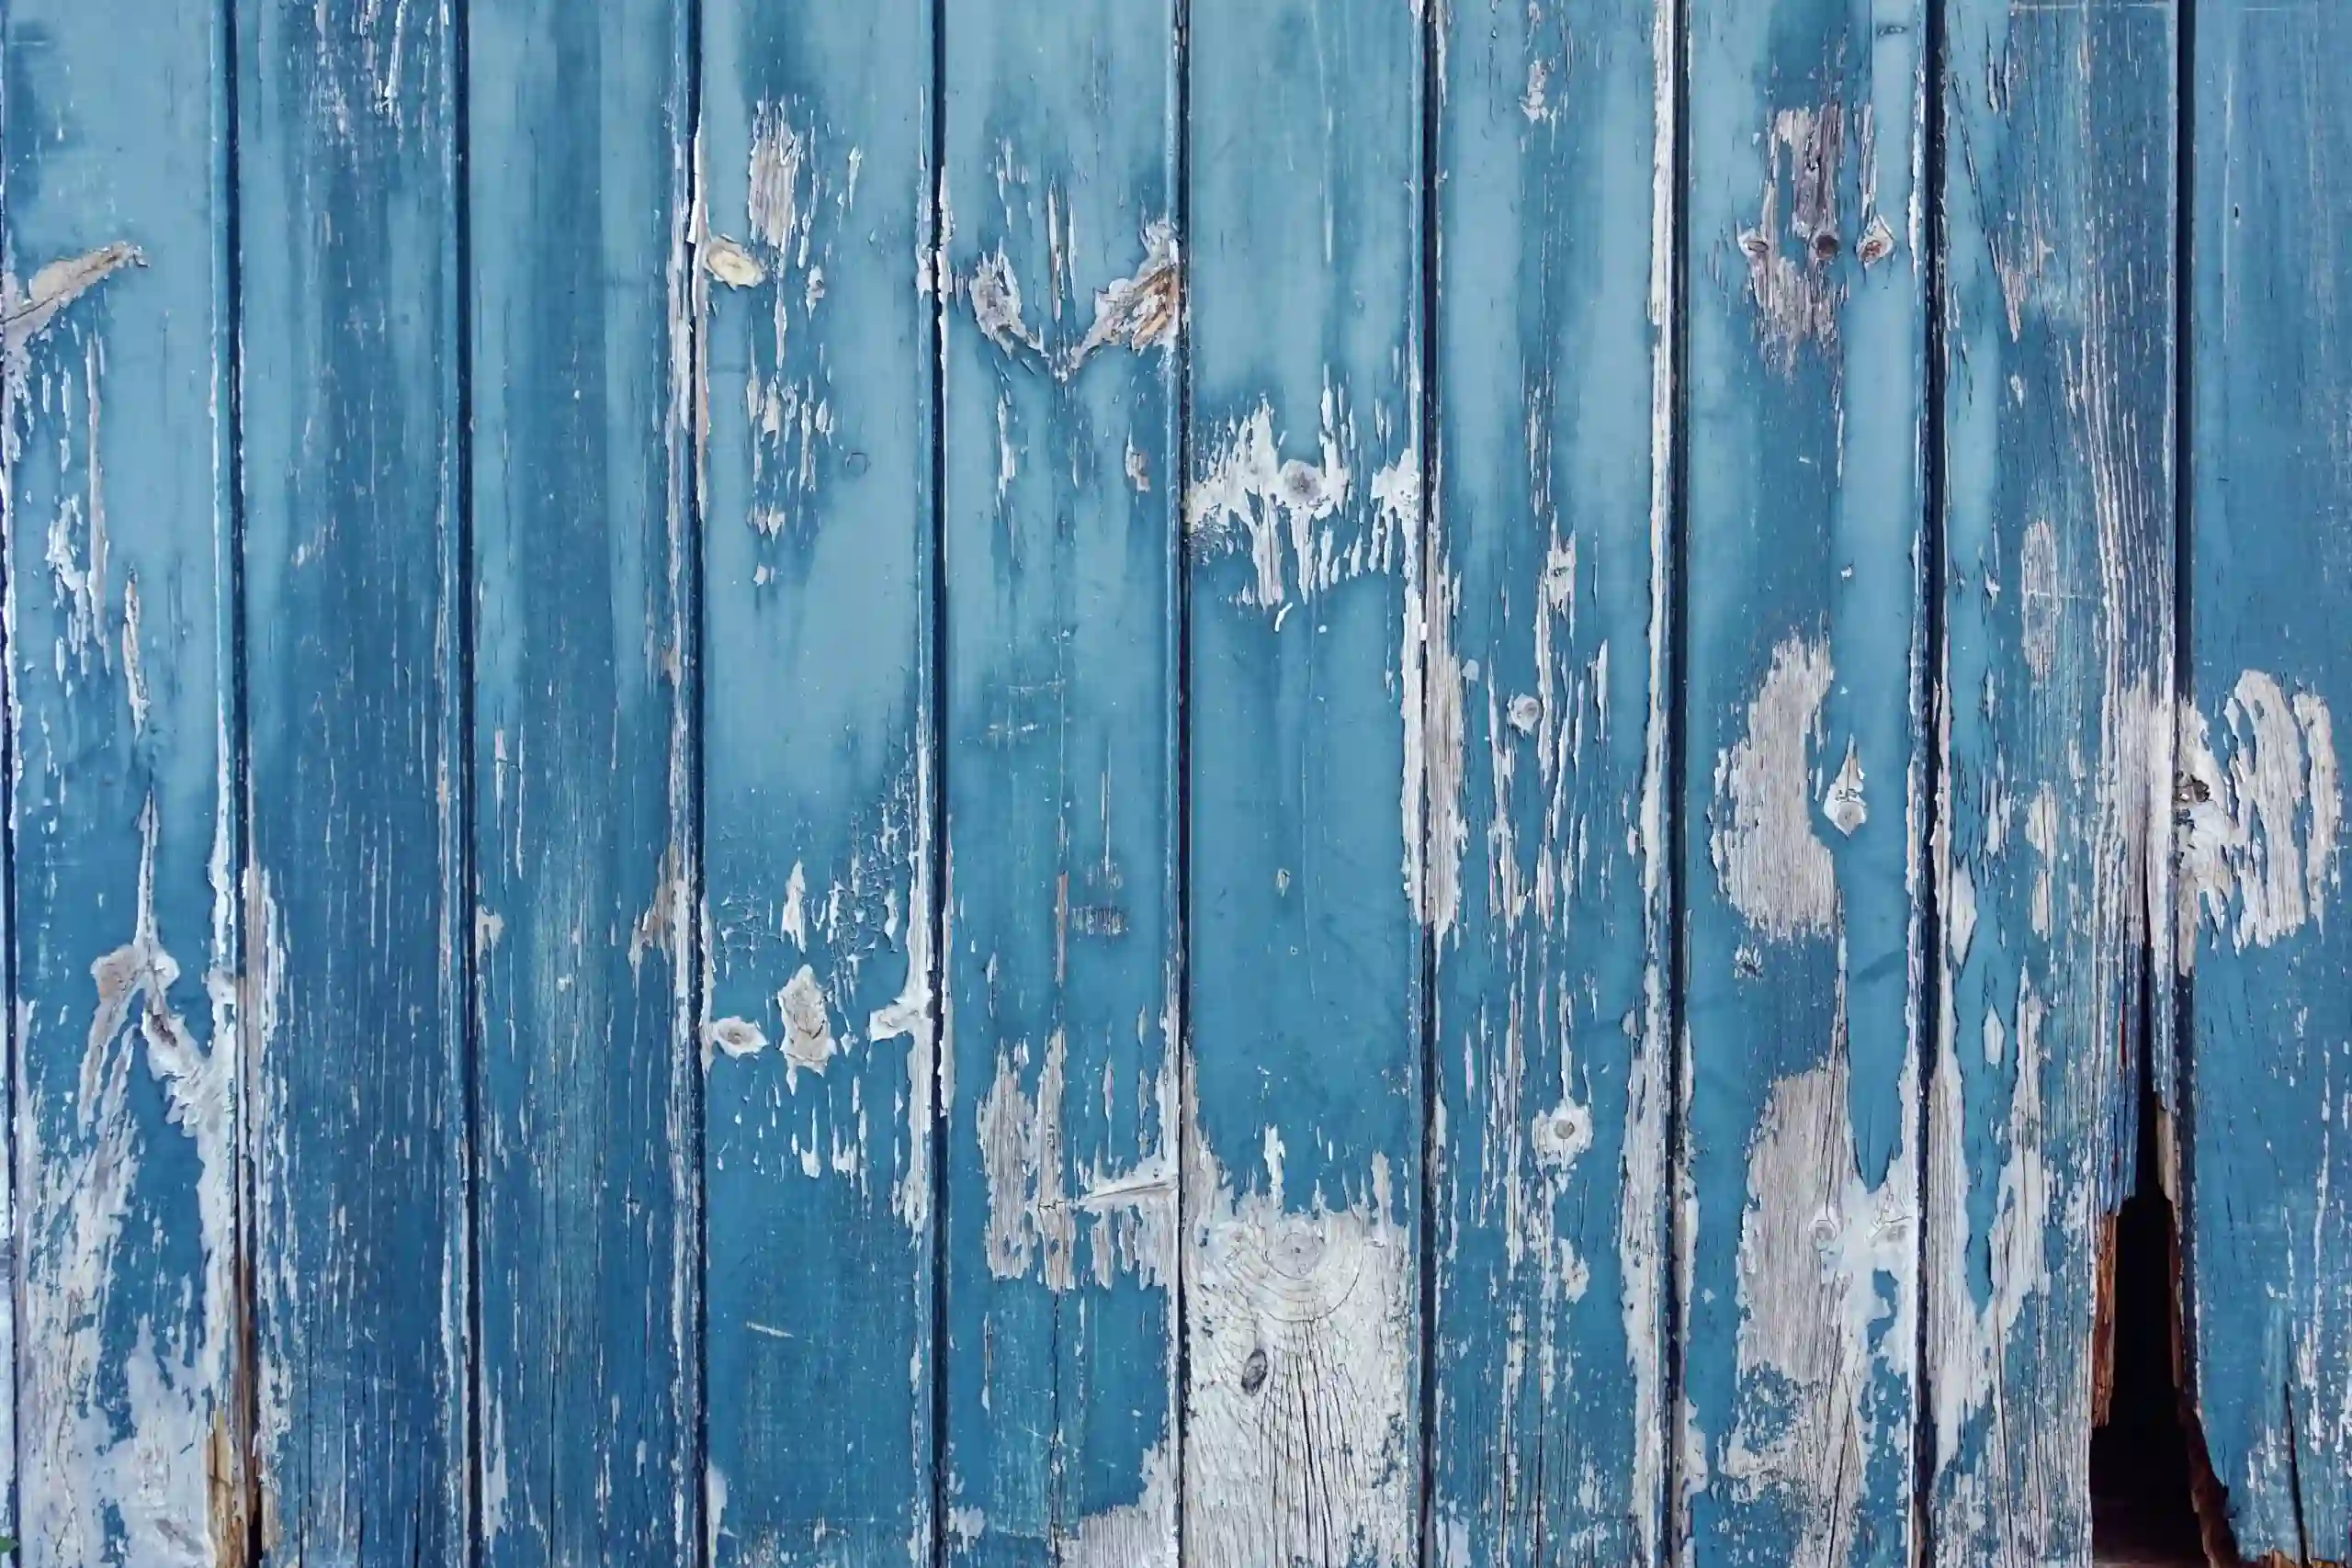 A painted fence with peeling blue paint revealing gray underneath. 